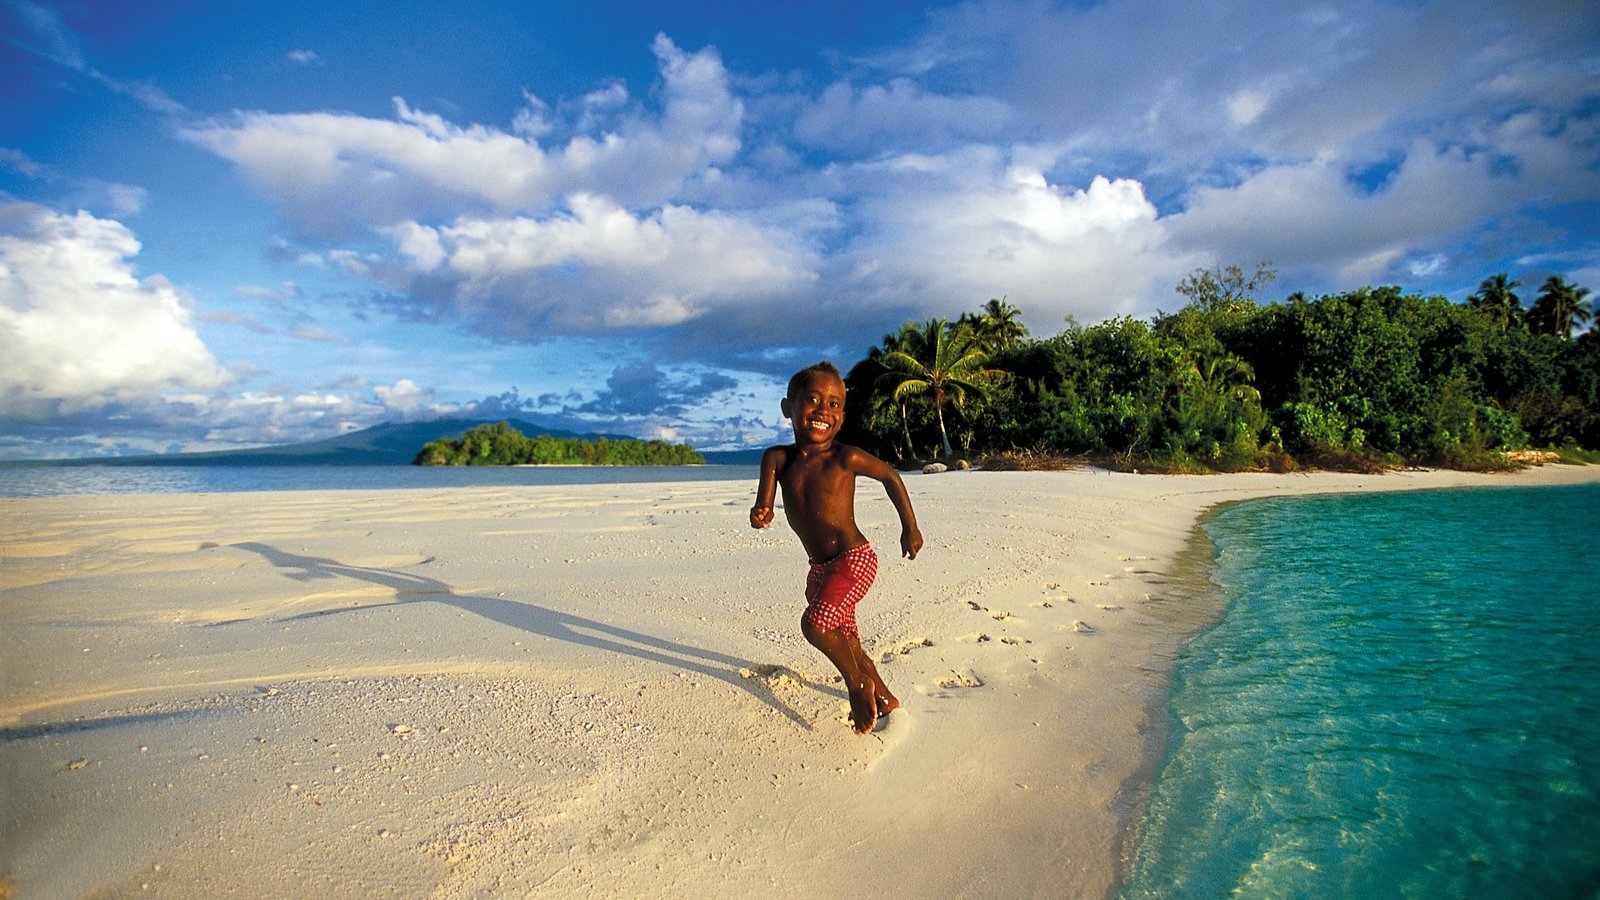 People Pictures Image Of Solomon Islands